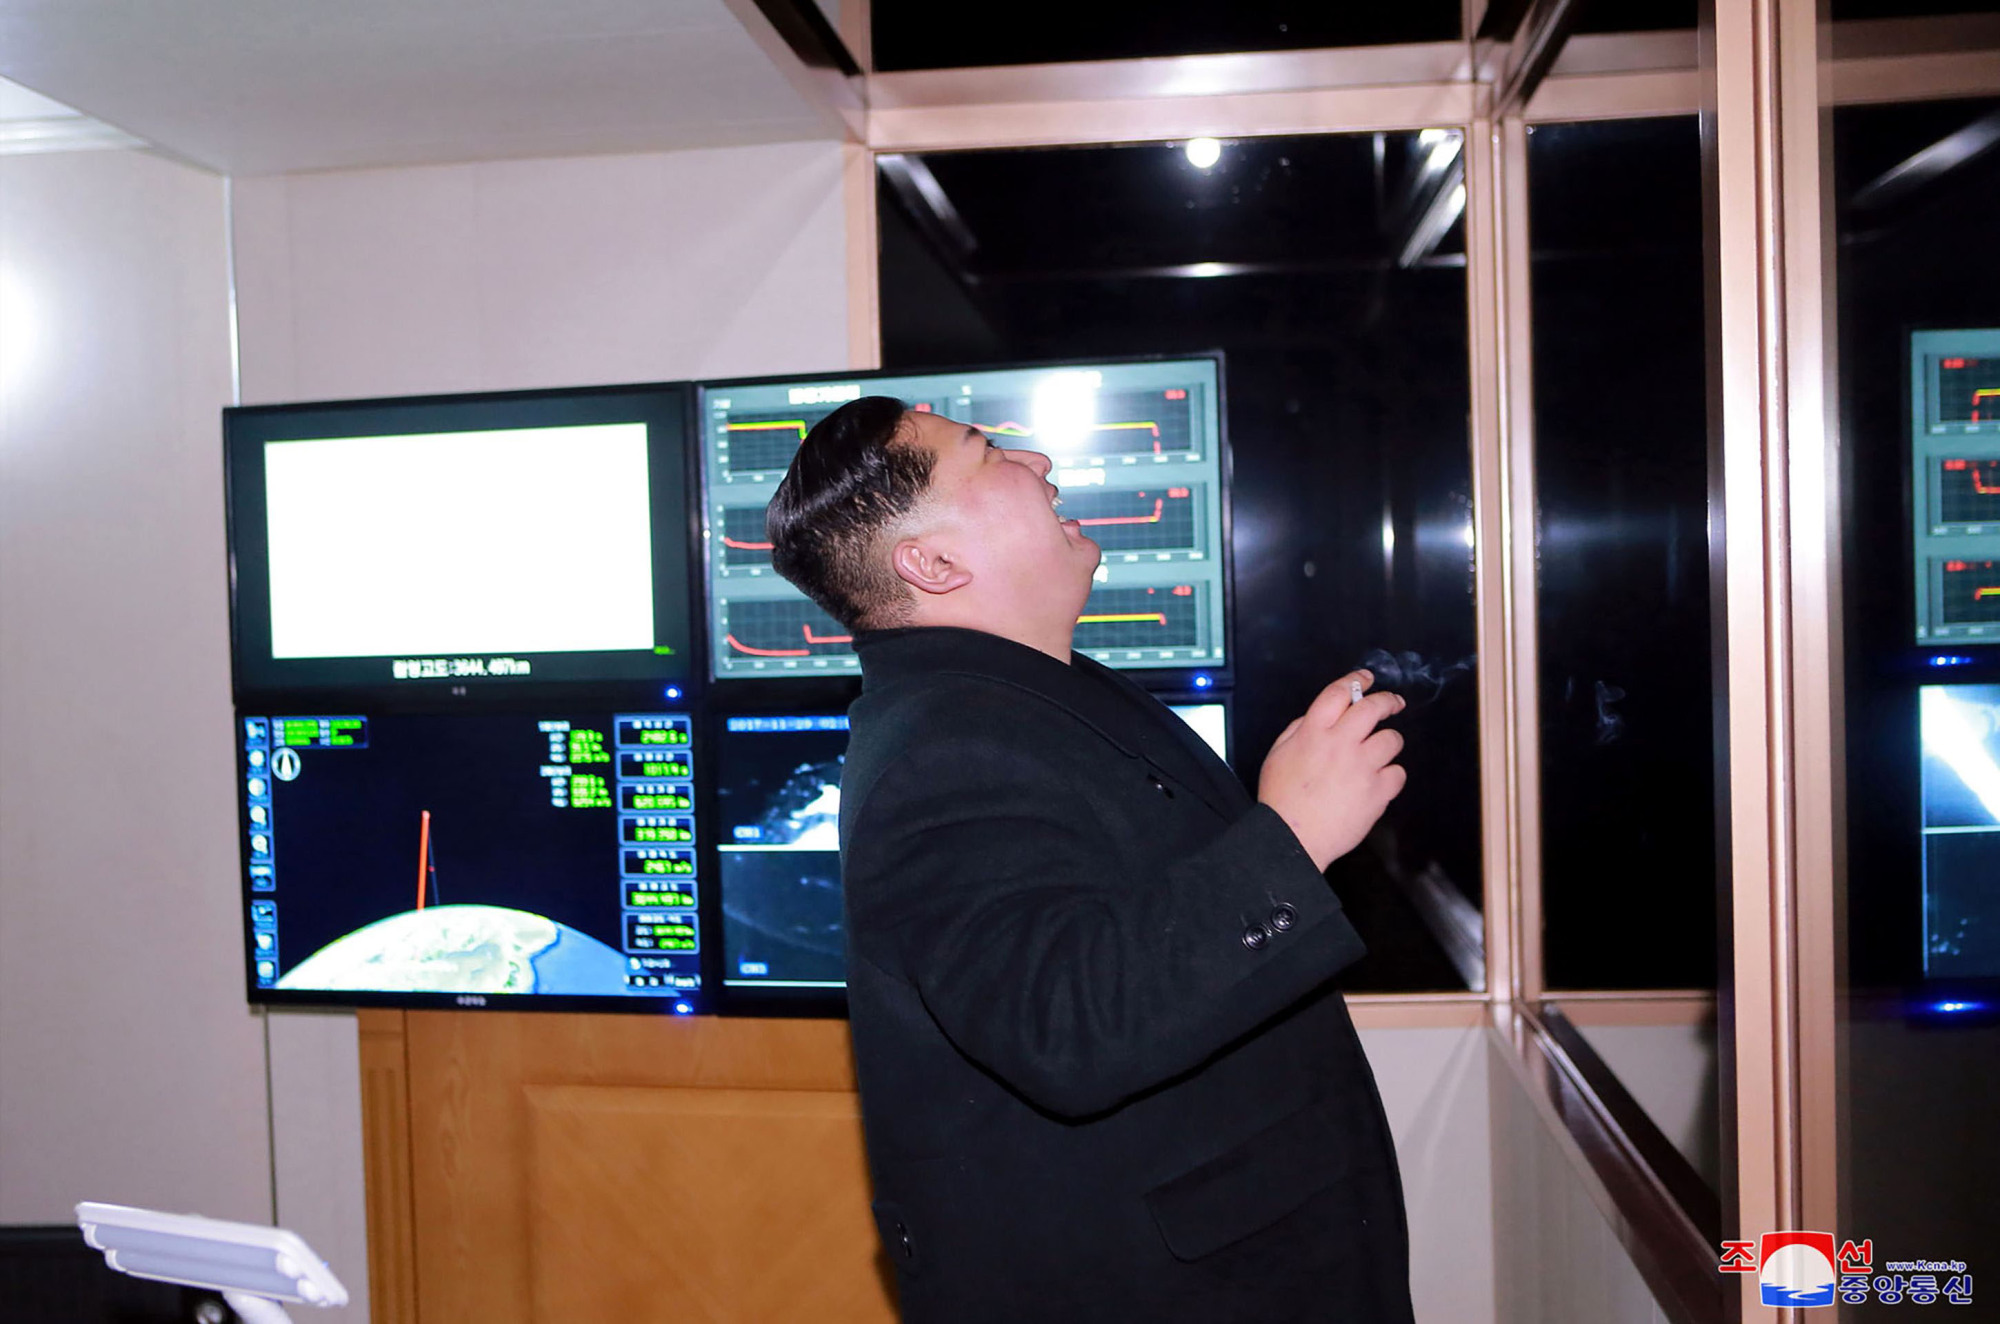 North Korean leader Kim Jong Un watches Wednesday's missile launch on a screen. | AFP-JIJI